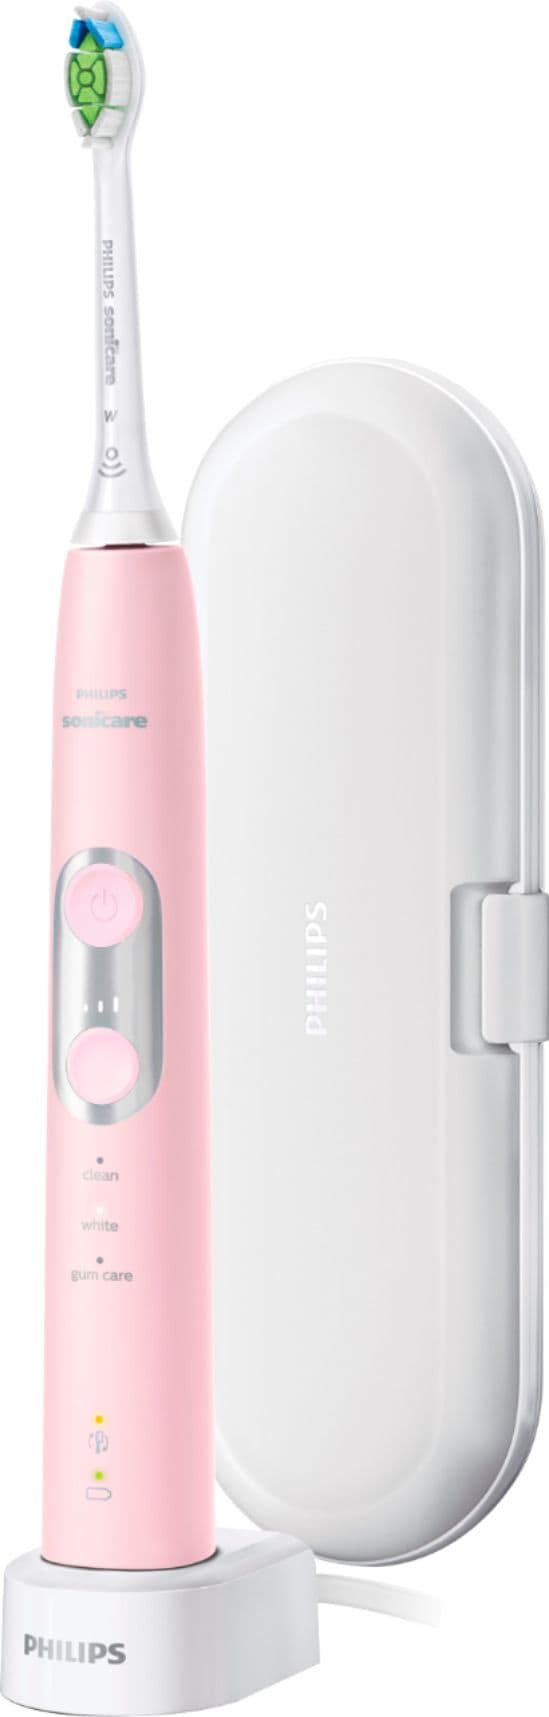 Philips Sonicare - ProtectiveClean 6100 Rechargeable Toothbrush - Pastel Pink_1